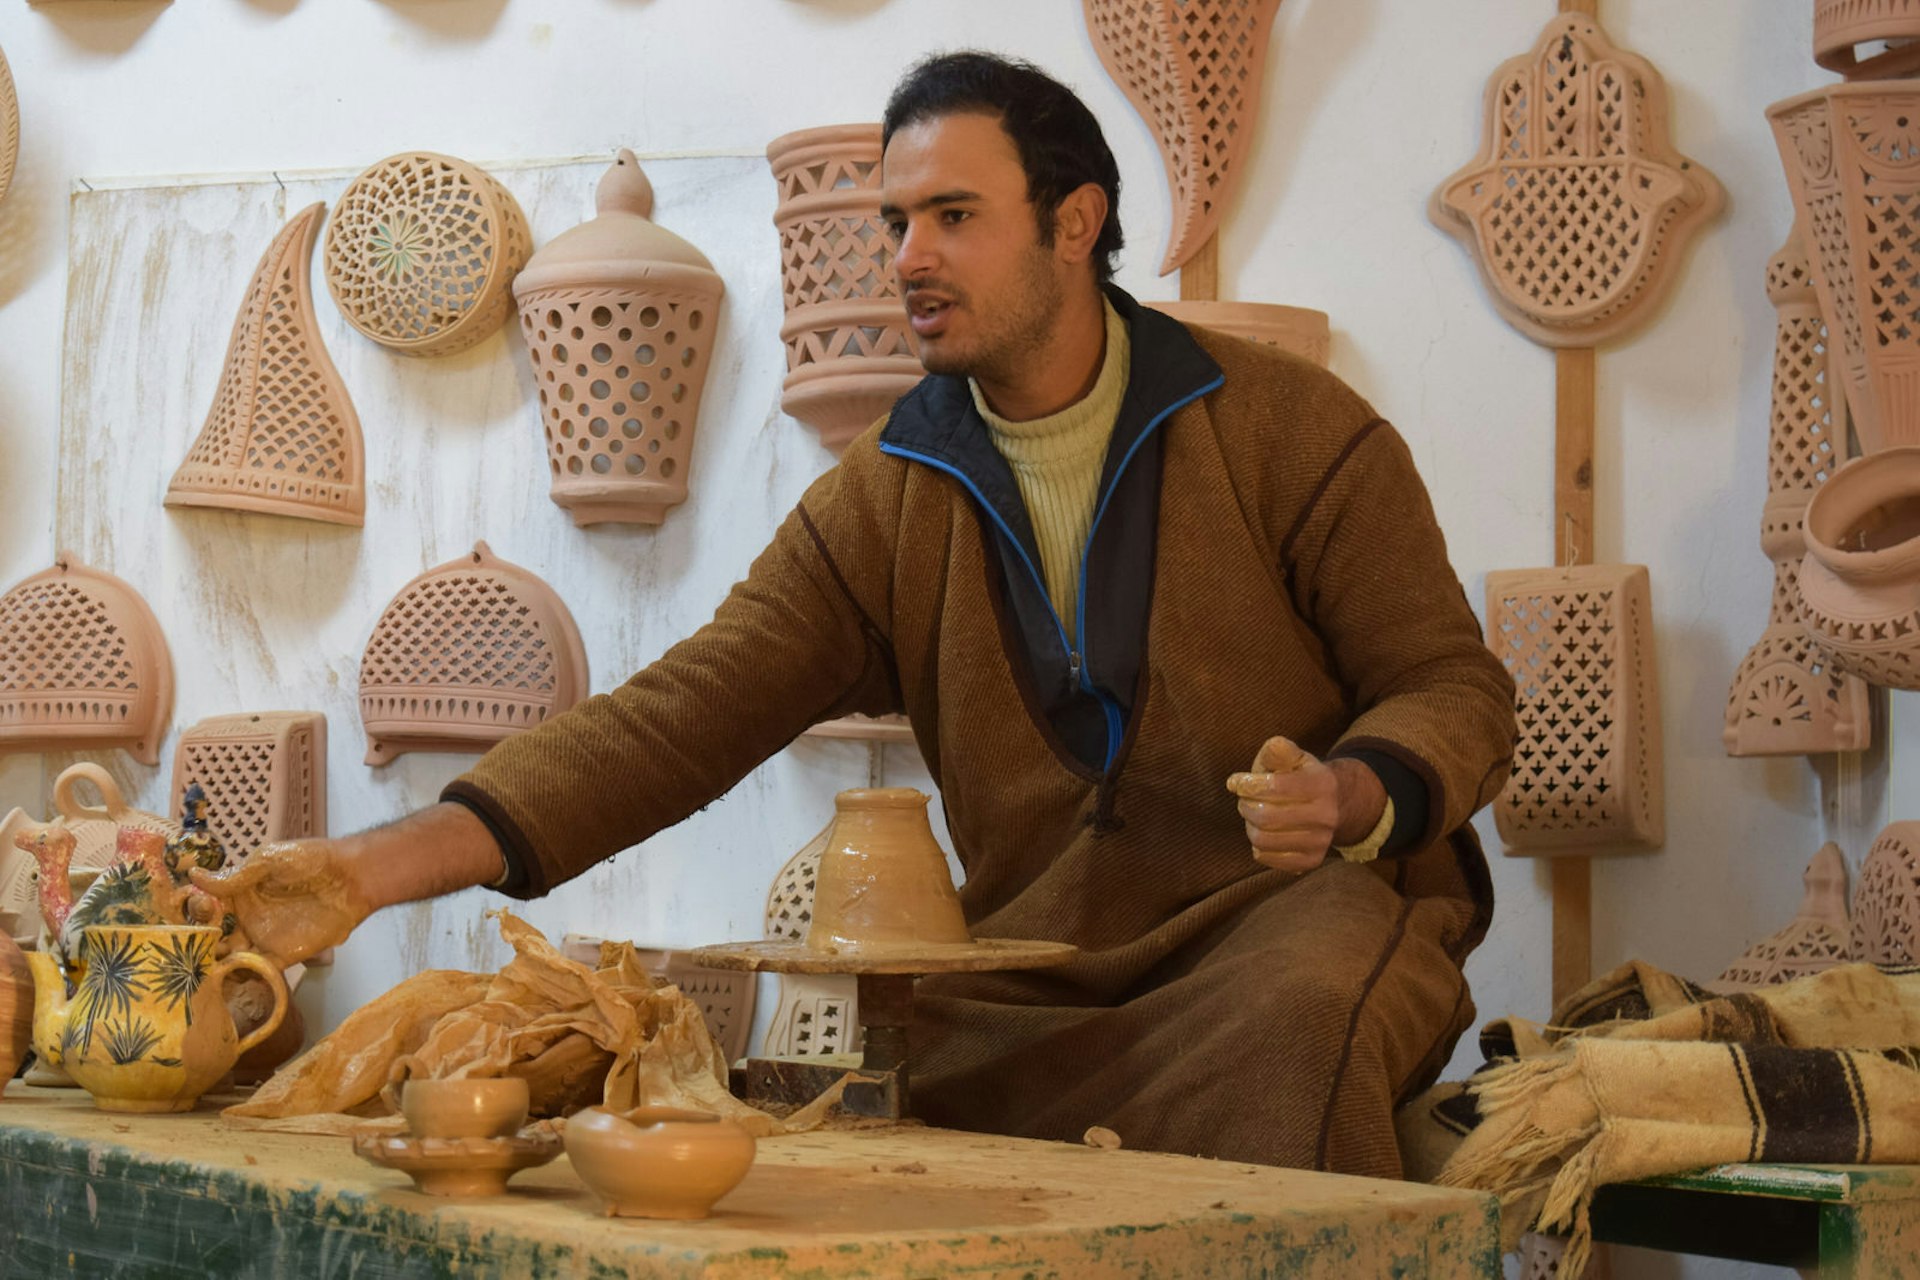 Berber potter who is a master of ceramic cookware shows off his works in Guellala, Djerba, Tunisia